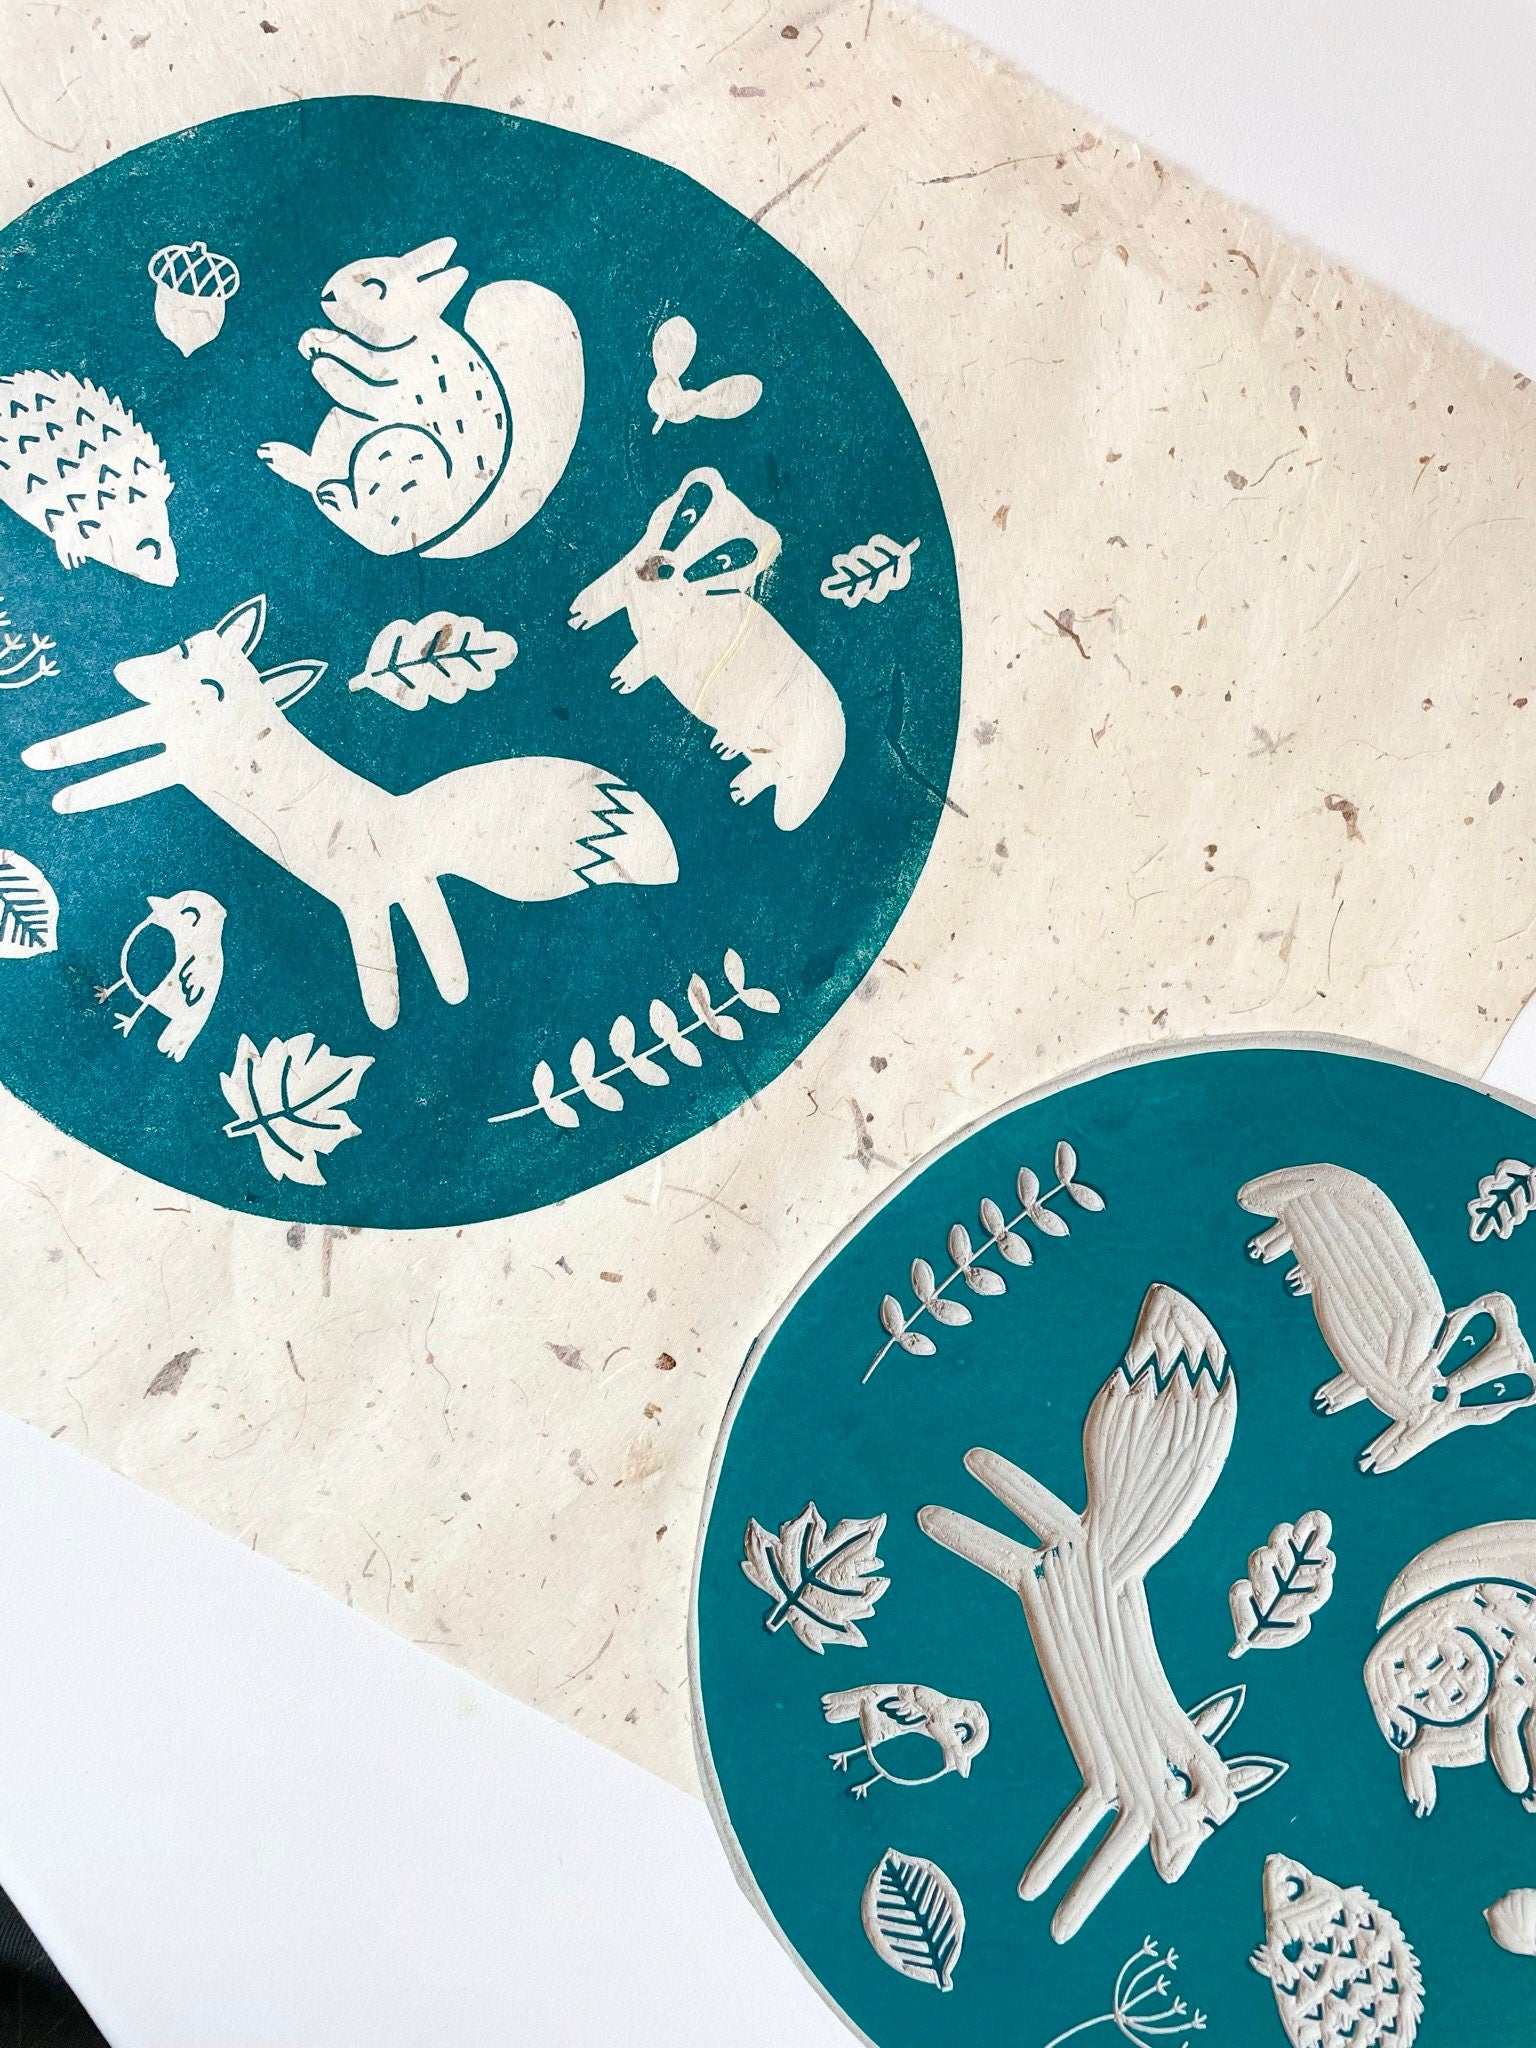 A circular lino print in green on gorgeous handmade mulberry paper. The print has woodland animals on it and fauna.